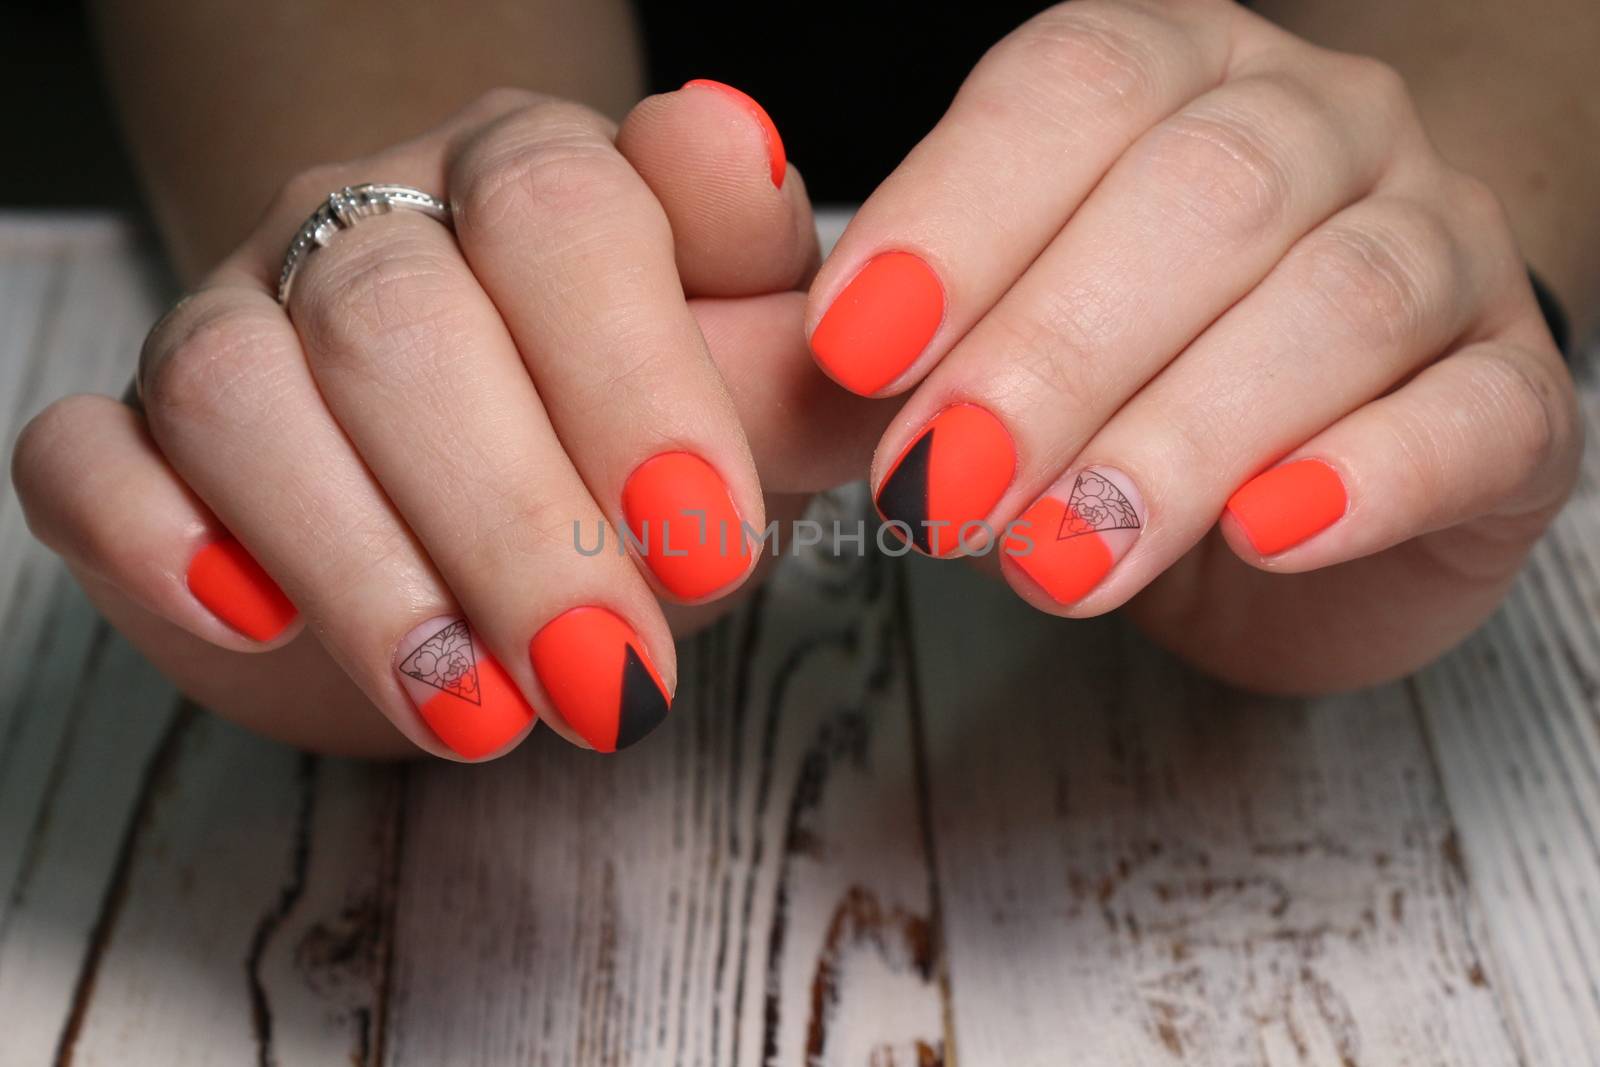 Multi-colored pastel manicure combined tone on tone with a striped background.